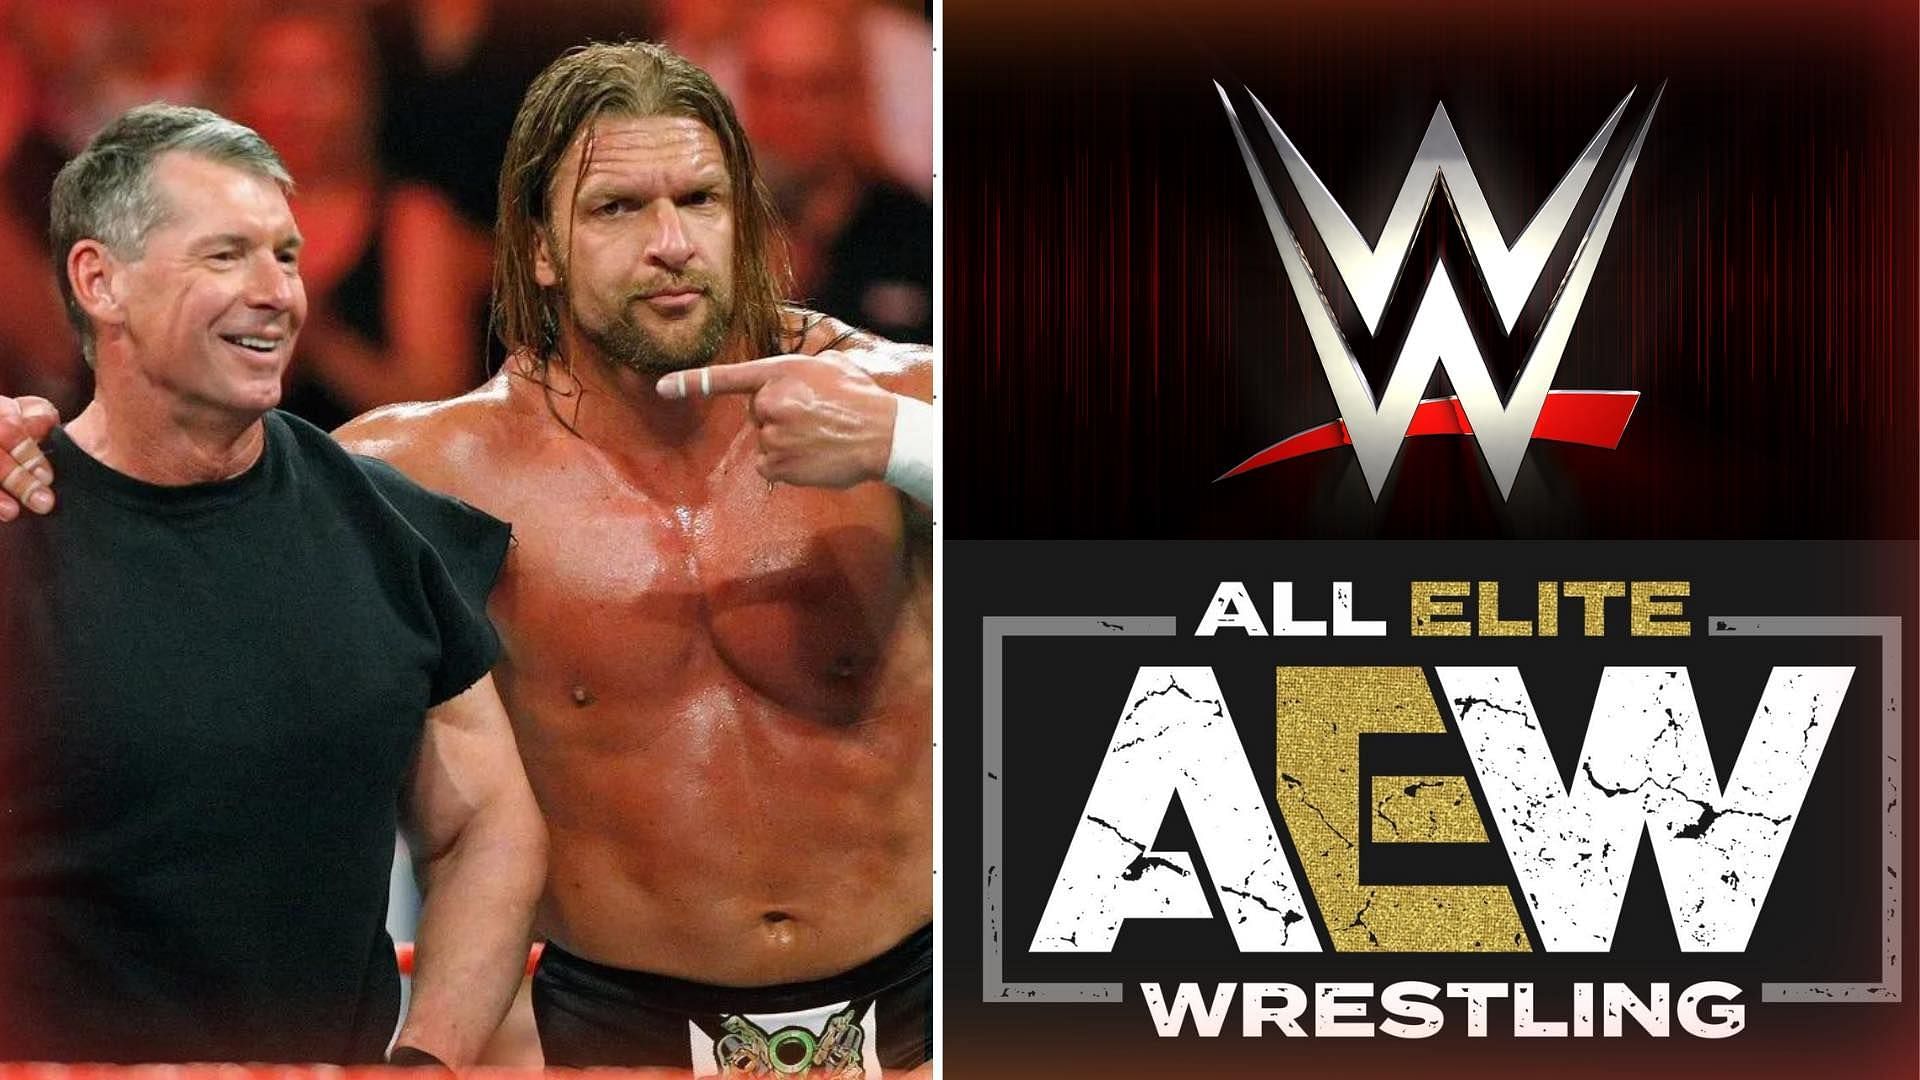 Vince McMahon and Triple H (left) and AEW and WWE logos (right).